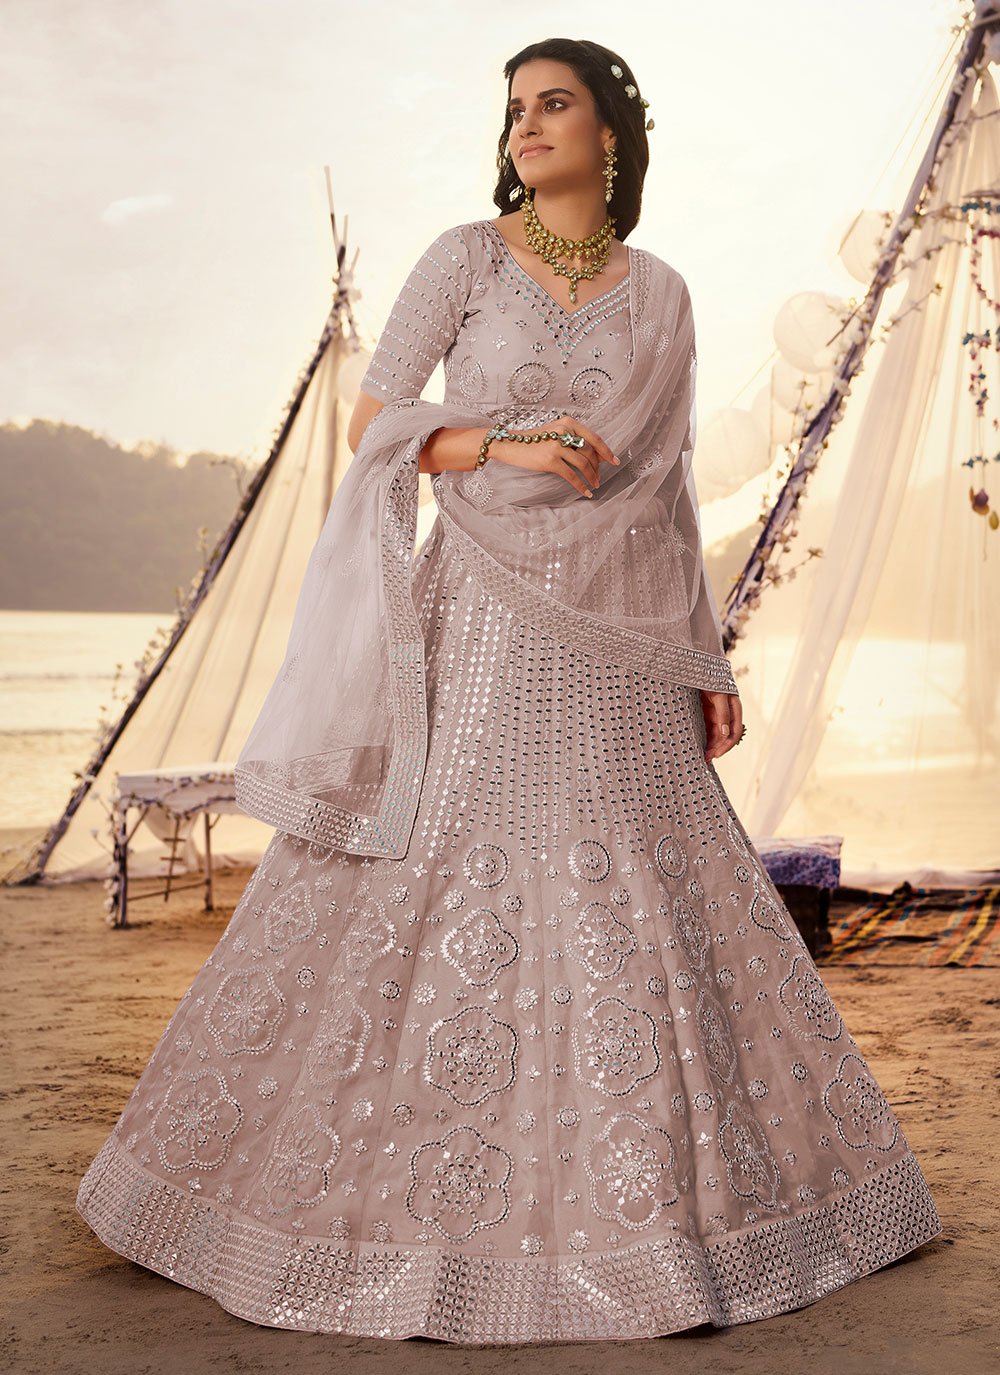 Sabyasachi Winter Bridal Collection 2019 Gives Us 4 Mesmerizing Trends!